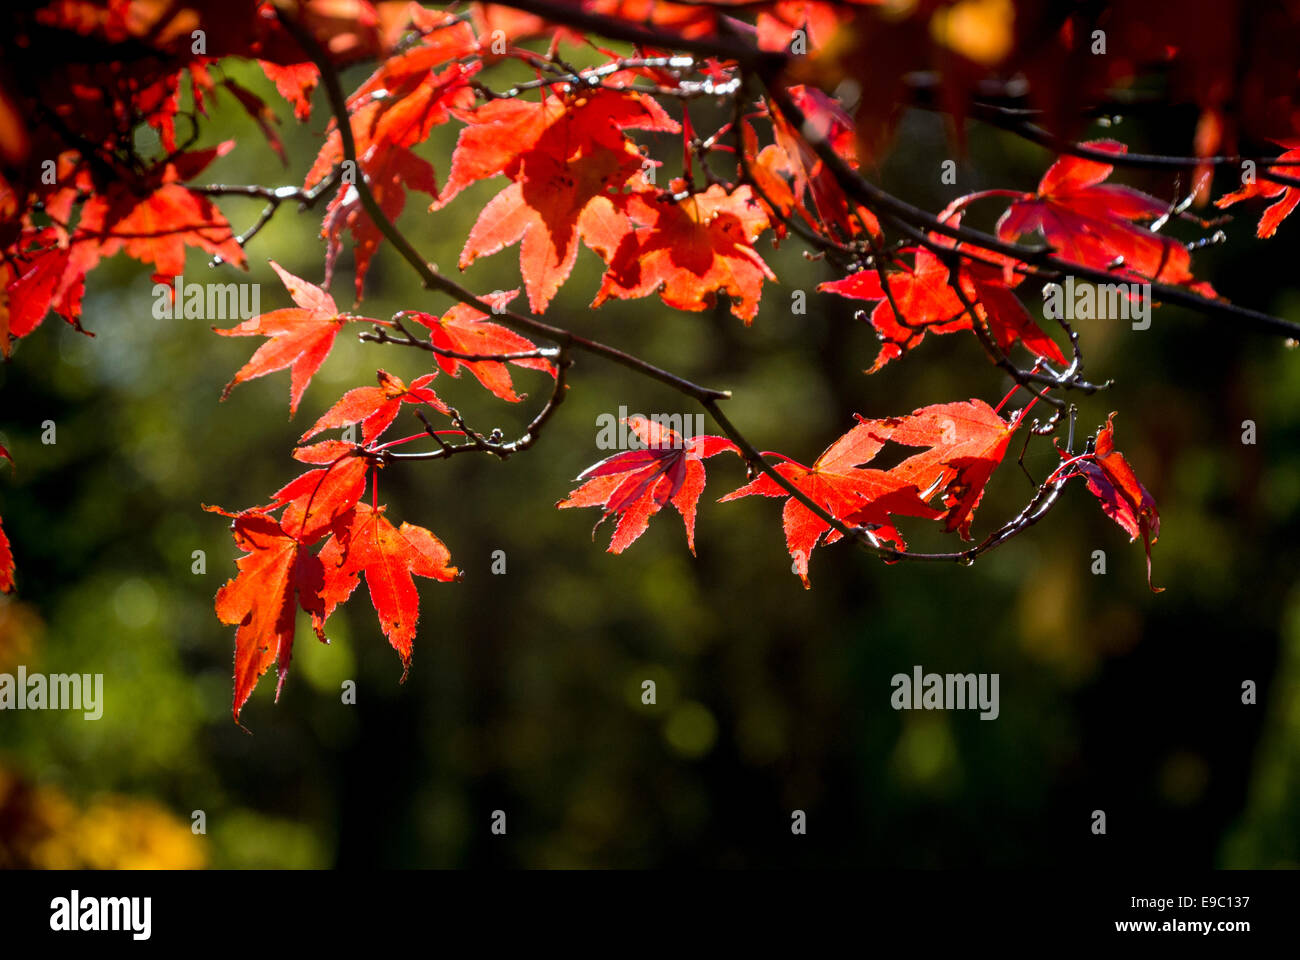 Backlit leaves of the Japanese Maple tree. Stock Photo